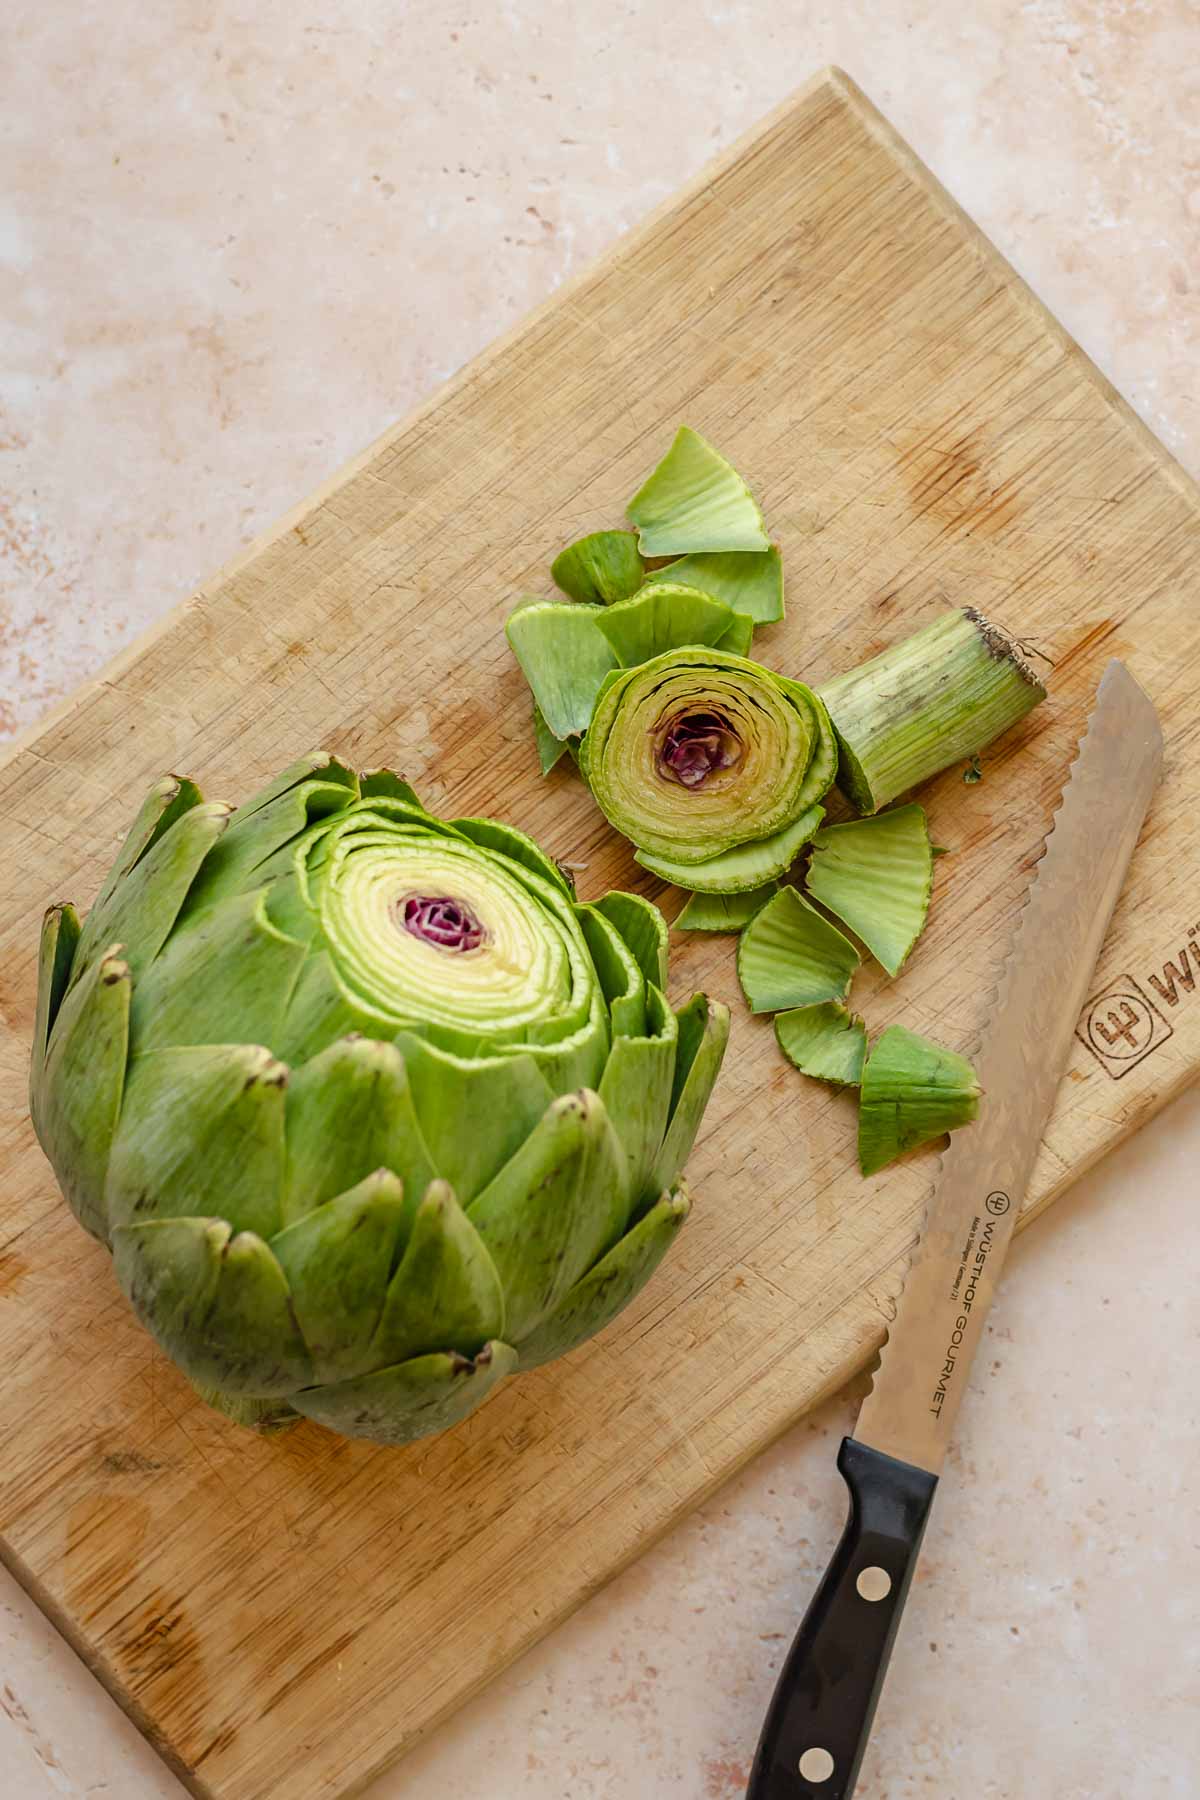 Artichoke with the top removed on a cutting board.